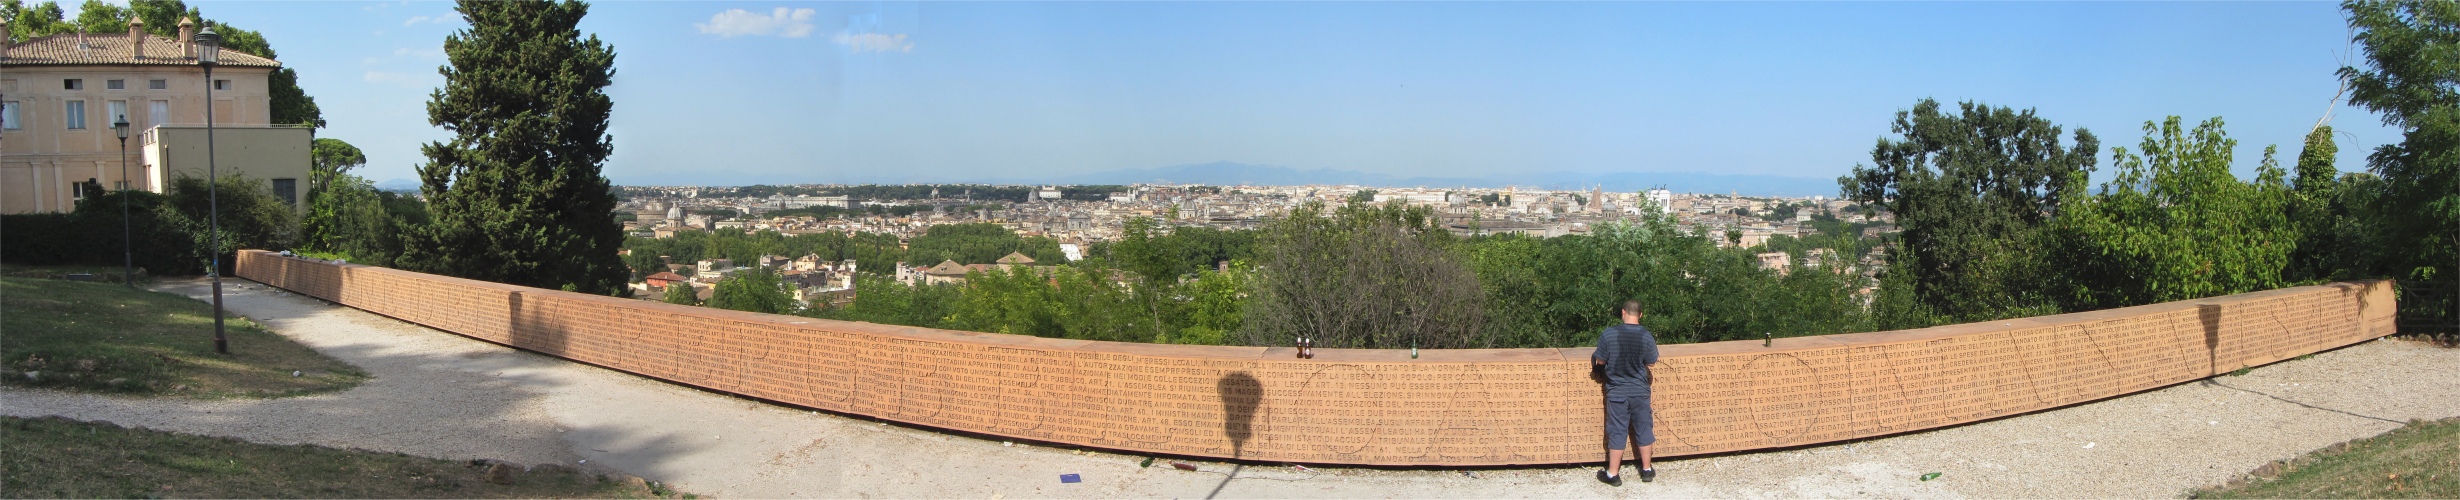 another_view_from_janiculum_hill